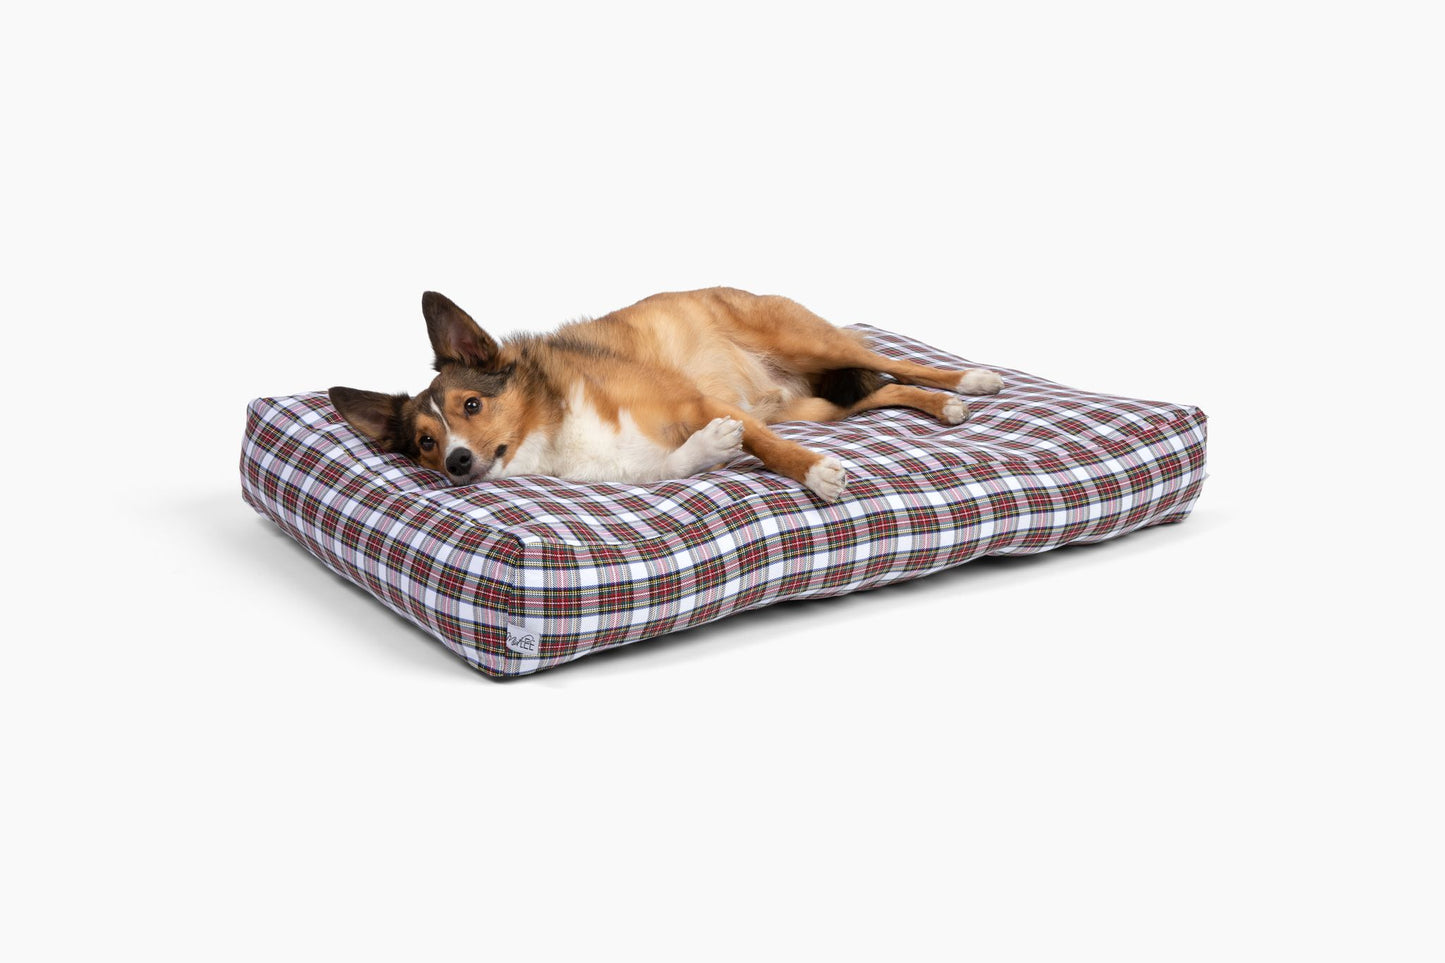 Midlee Christmas Plaid Dog Bed Cover